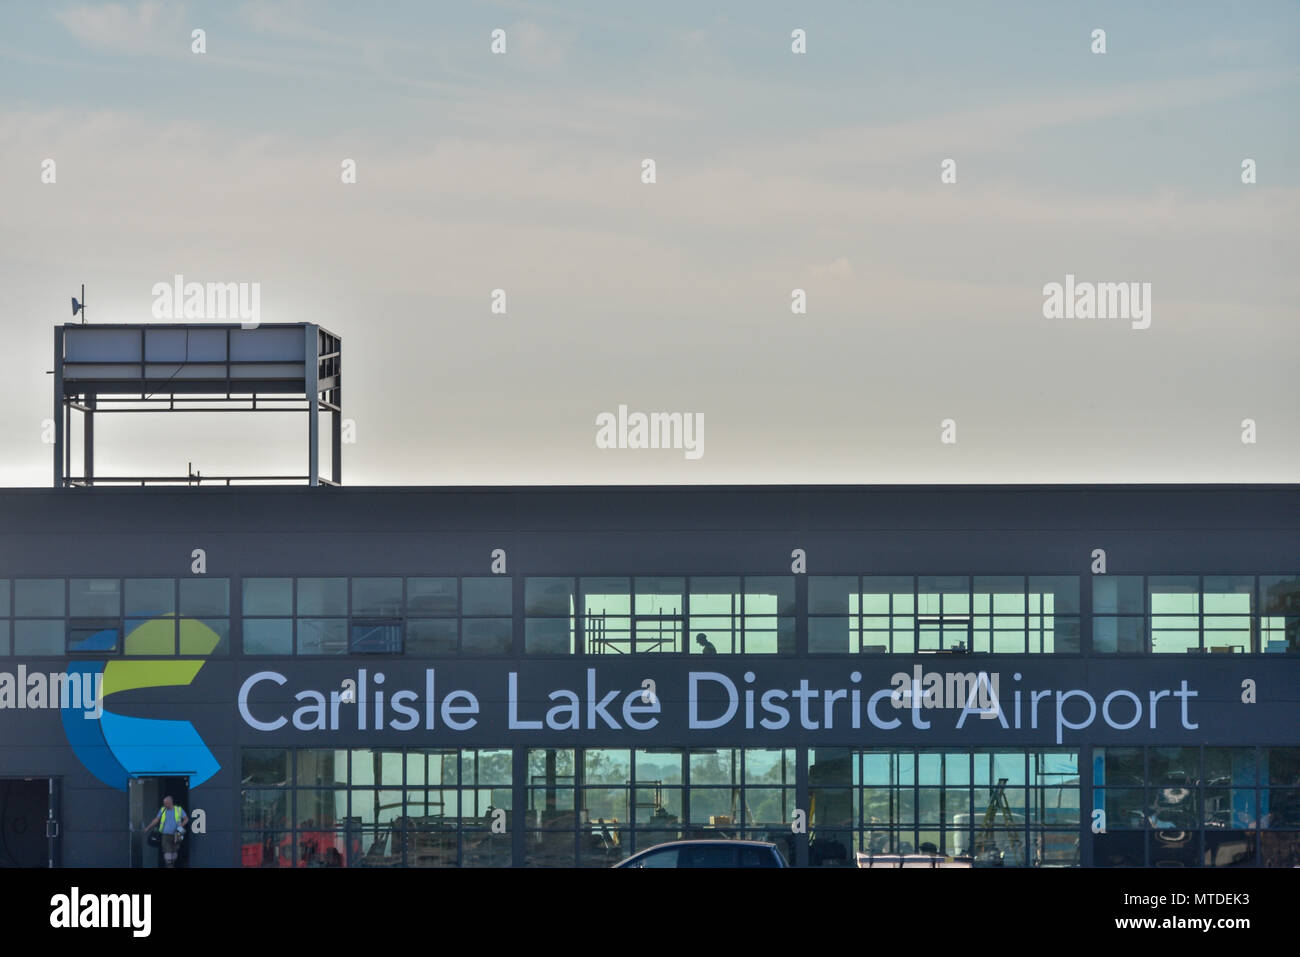 Carlisle, UK. 29th May 2018. First flights from Carlisle Lake District Airport postponed. Work continues on the new airport terminal building. Just days away from the departure of the for commercial flight from the airport since the 1980's, the services operated by Scottish airline Loganair have been postponed until September.   Photography 20 Credit: STUART WALKER/Alamy Live News Stock Photo